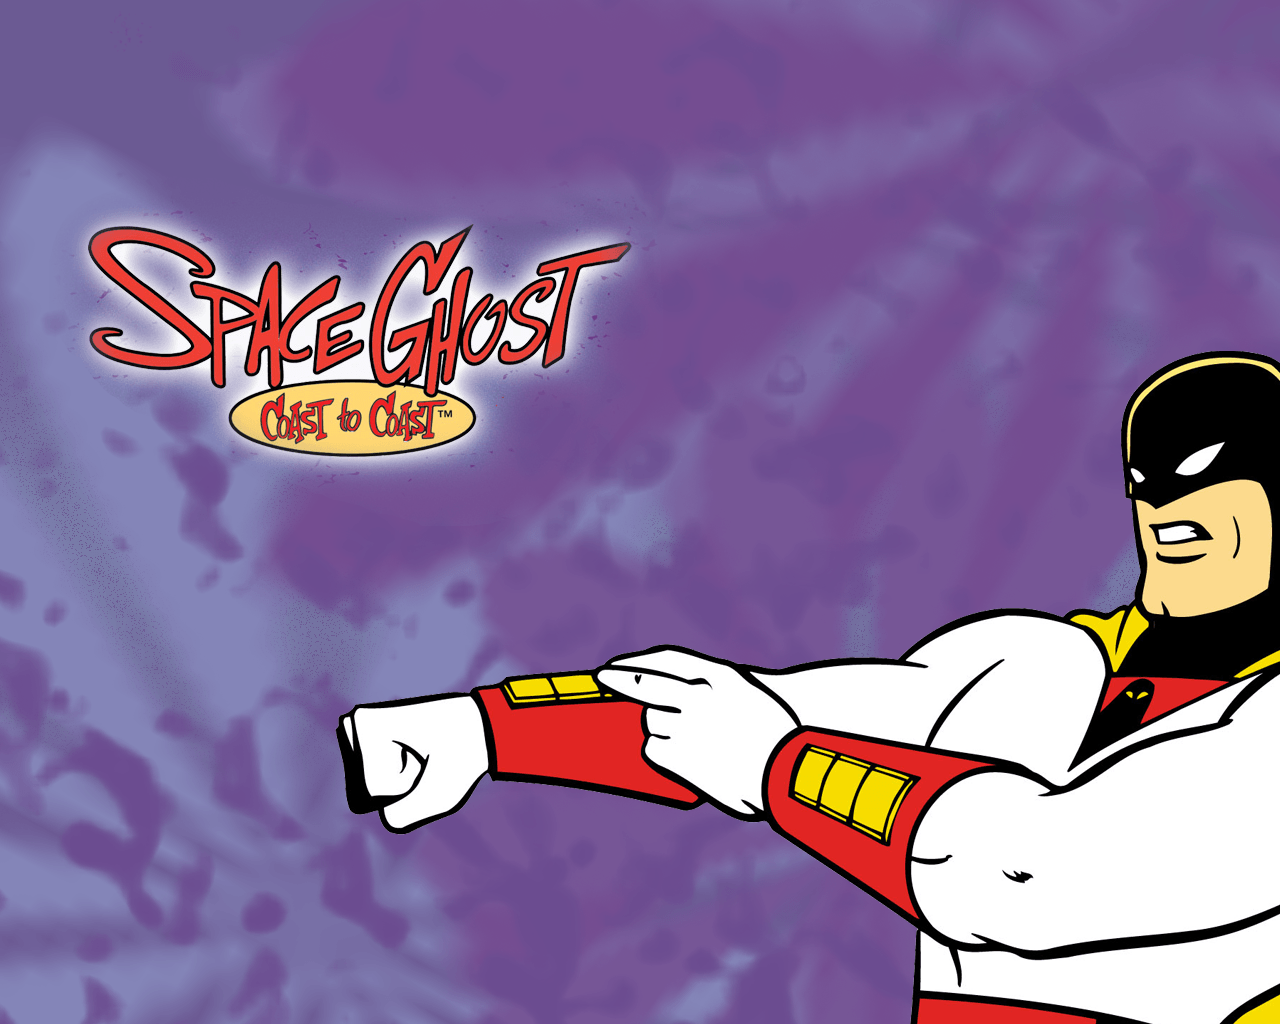 space ghost Wallpaper and Background Imagex1024